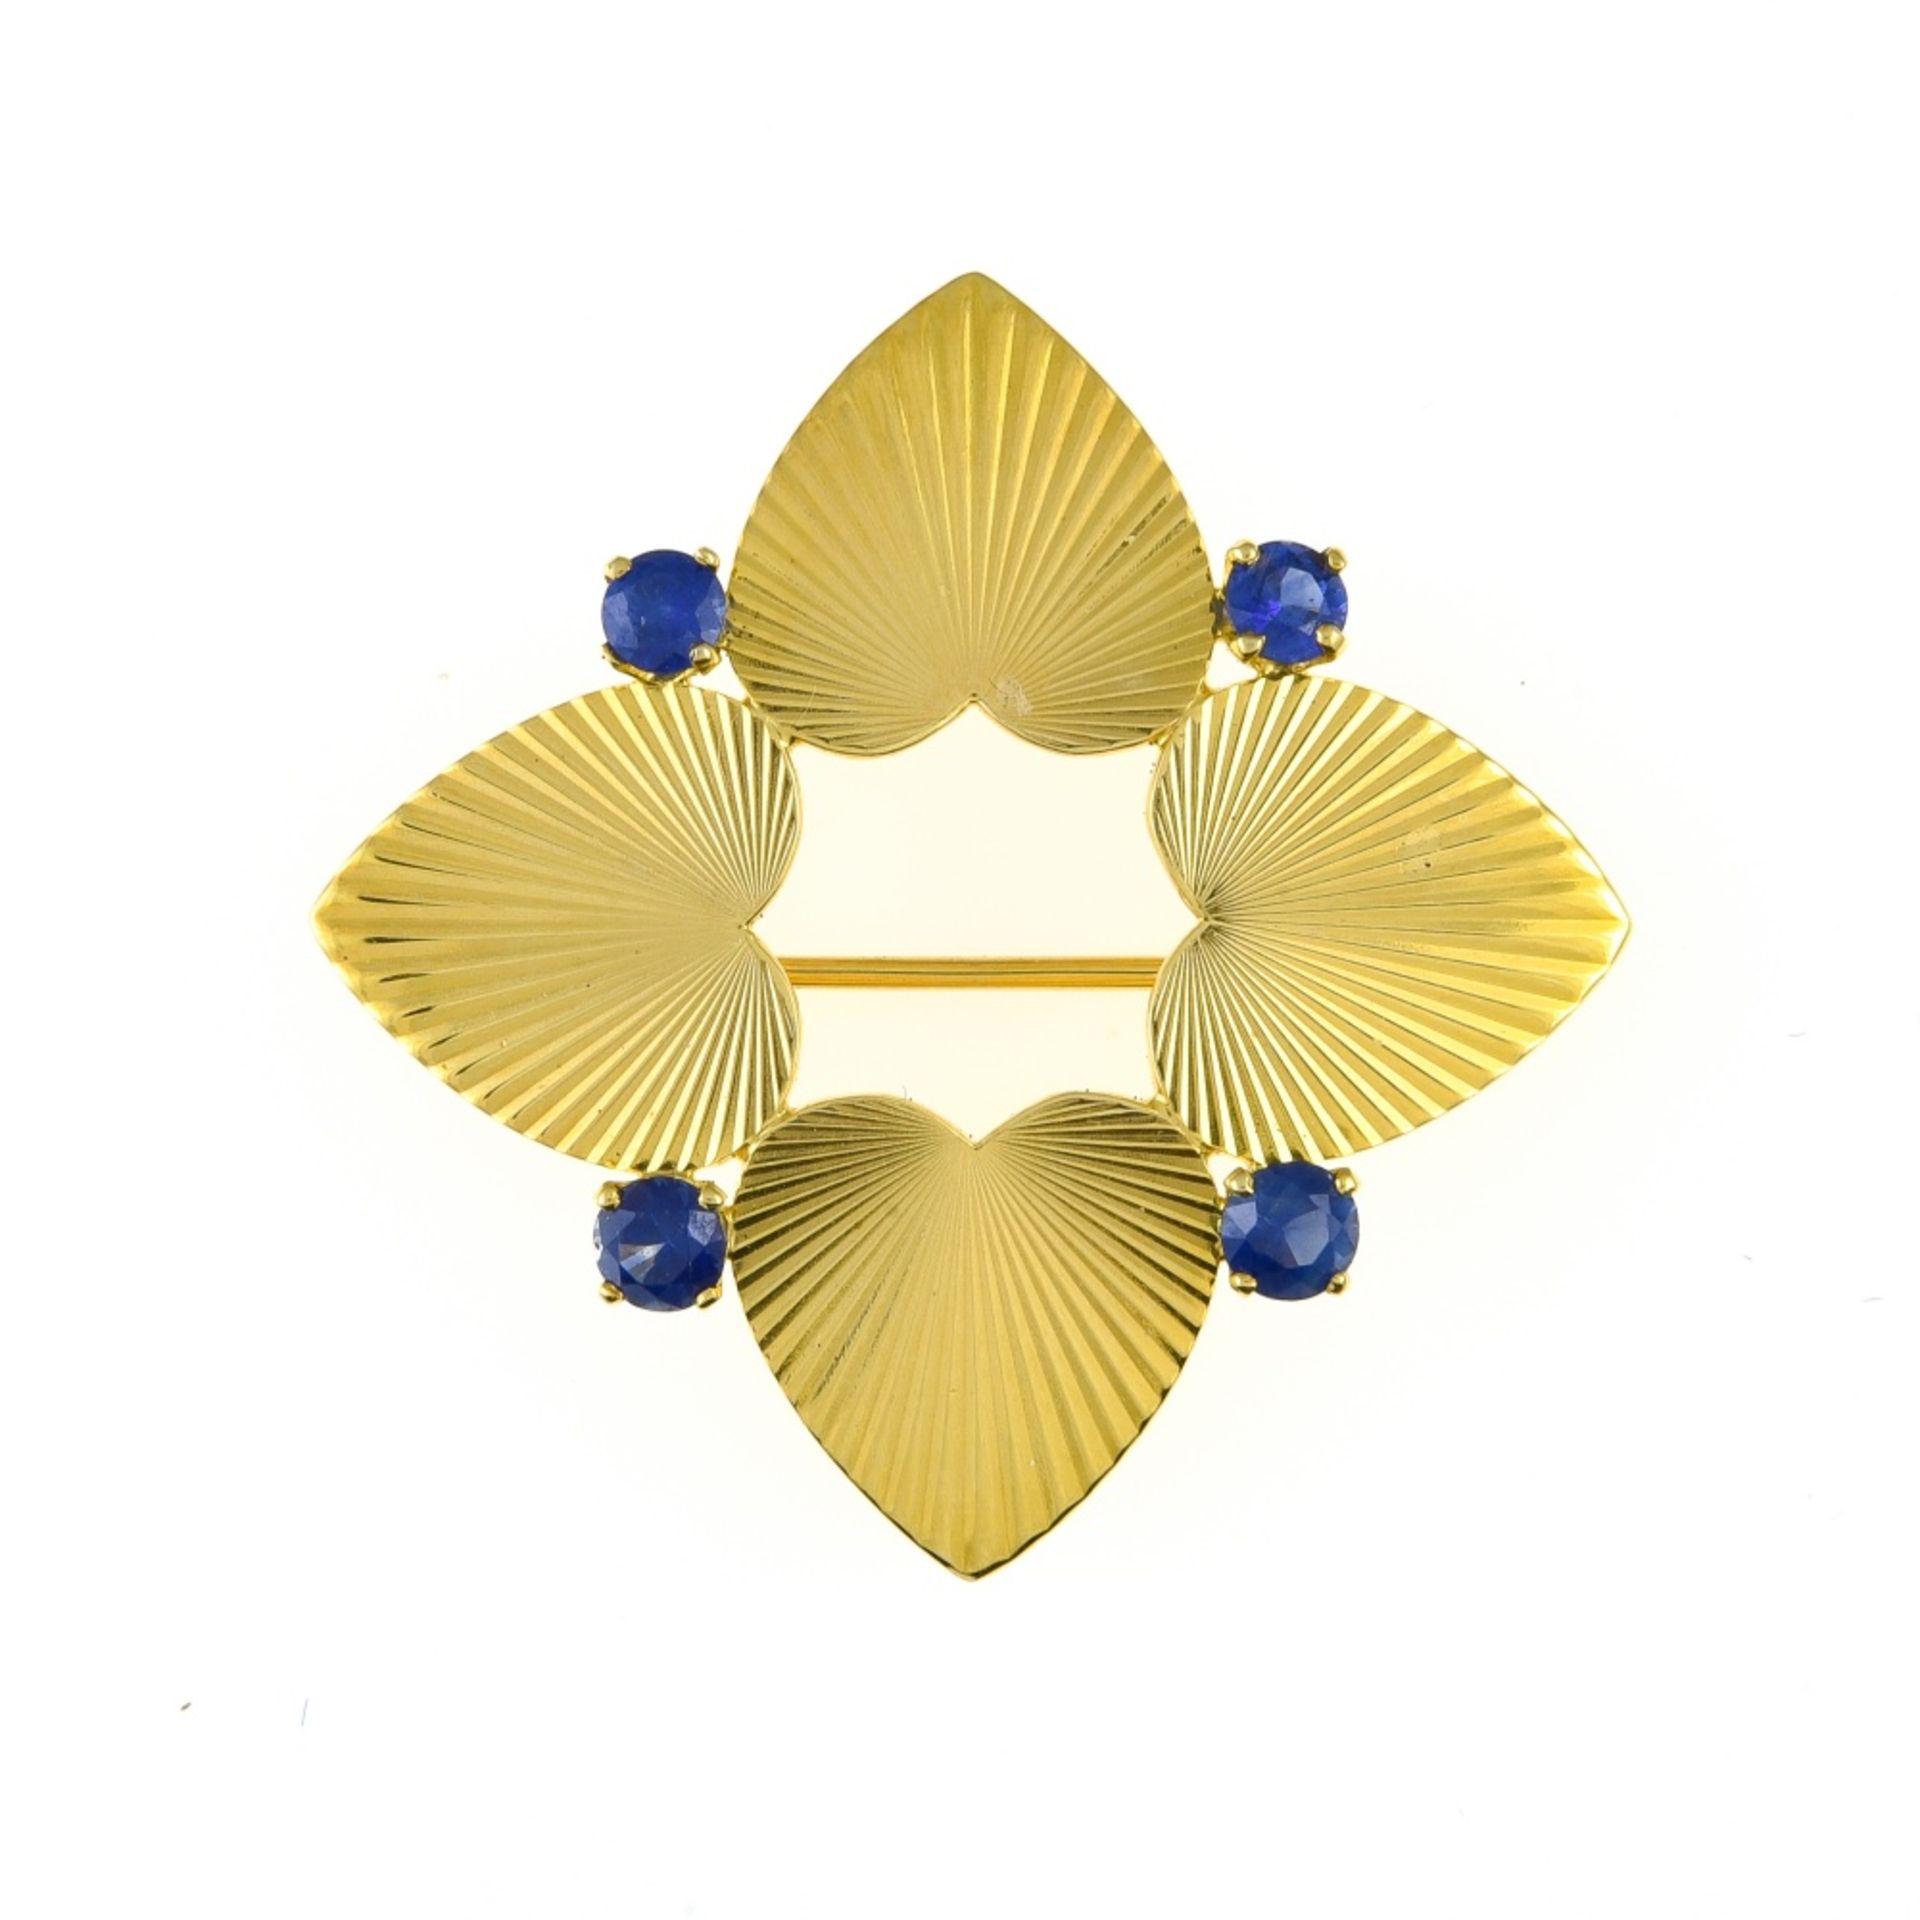 Tiffany & Co 4 heart brooch 14 kt yellow gold, depicting 4 hearts back-to-back and set with 4 blue